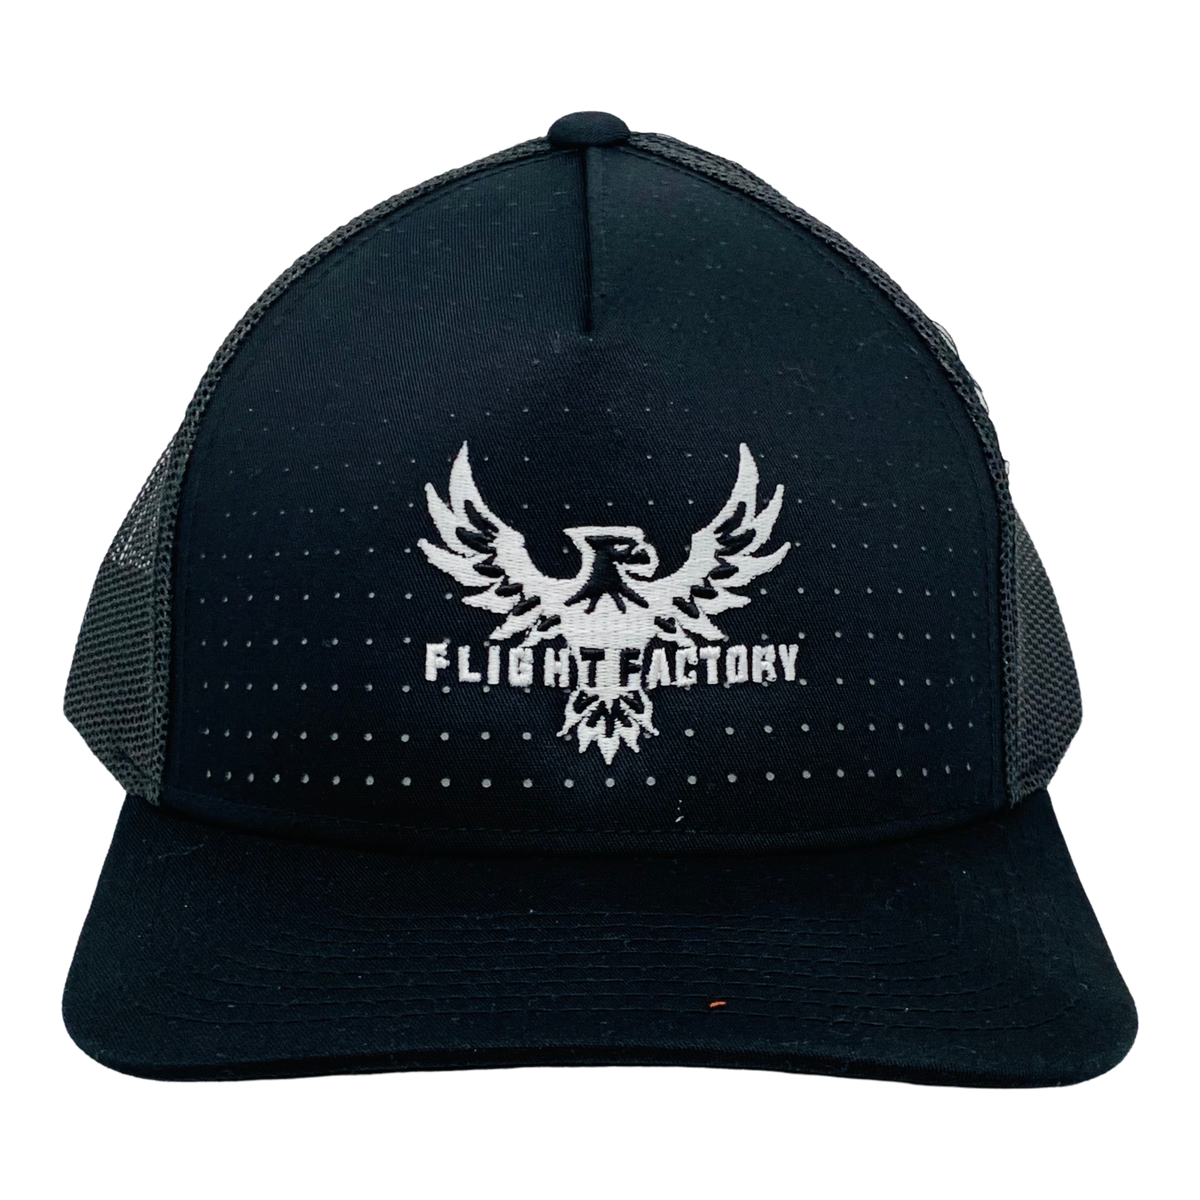 Flight Factory Eagle 5 Panel Perforated Trucker Hats